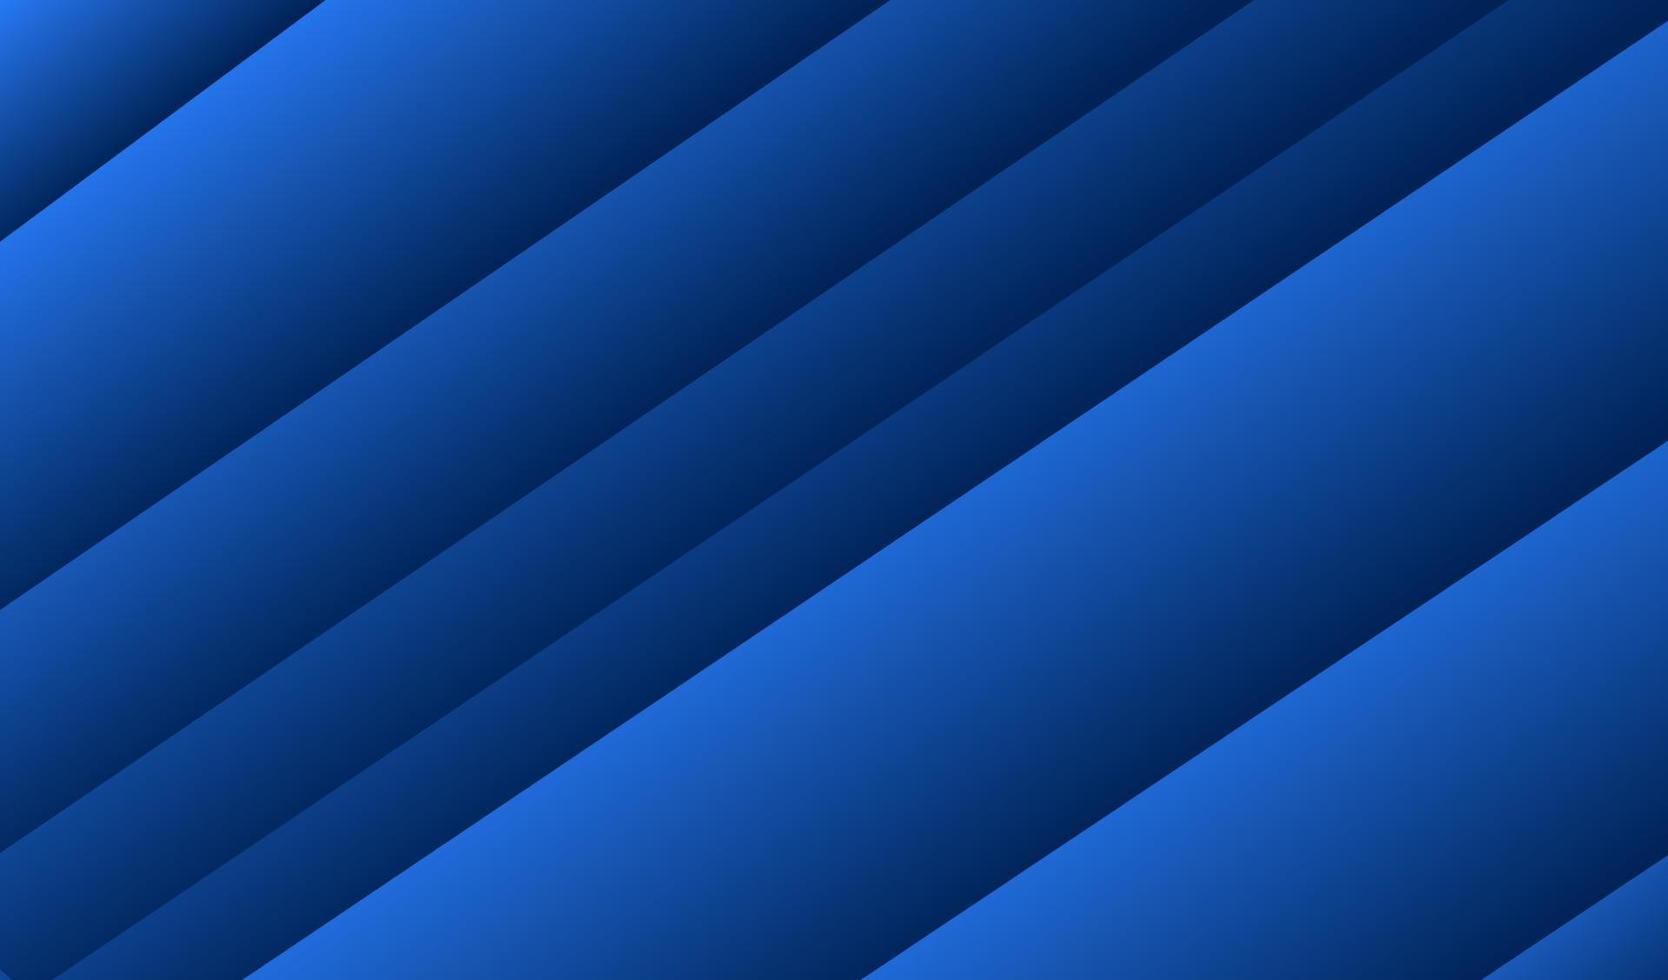 Wallpaper, abstract background with straight diagonal blue pattern vector